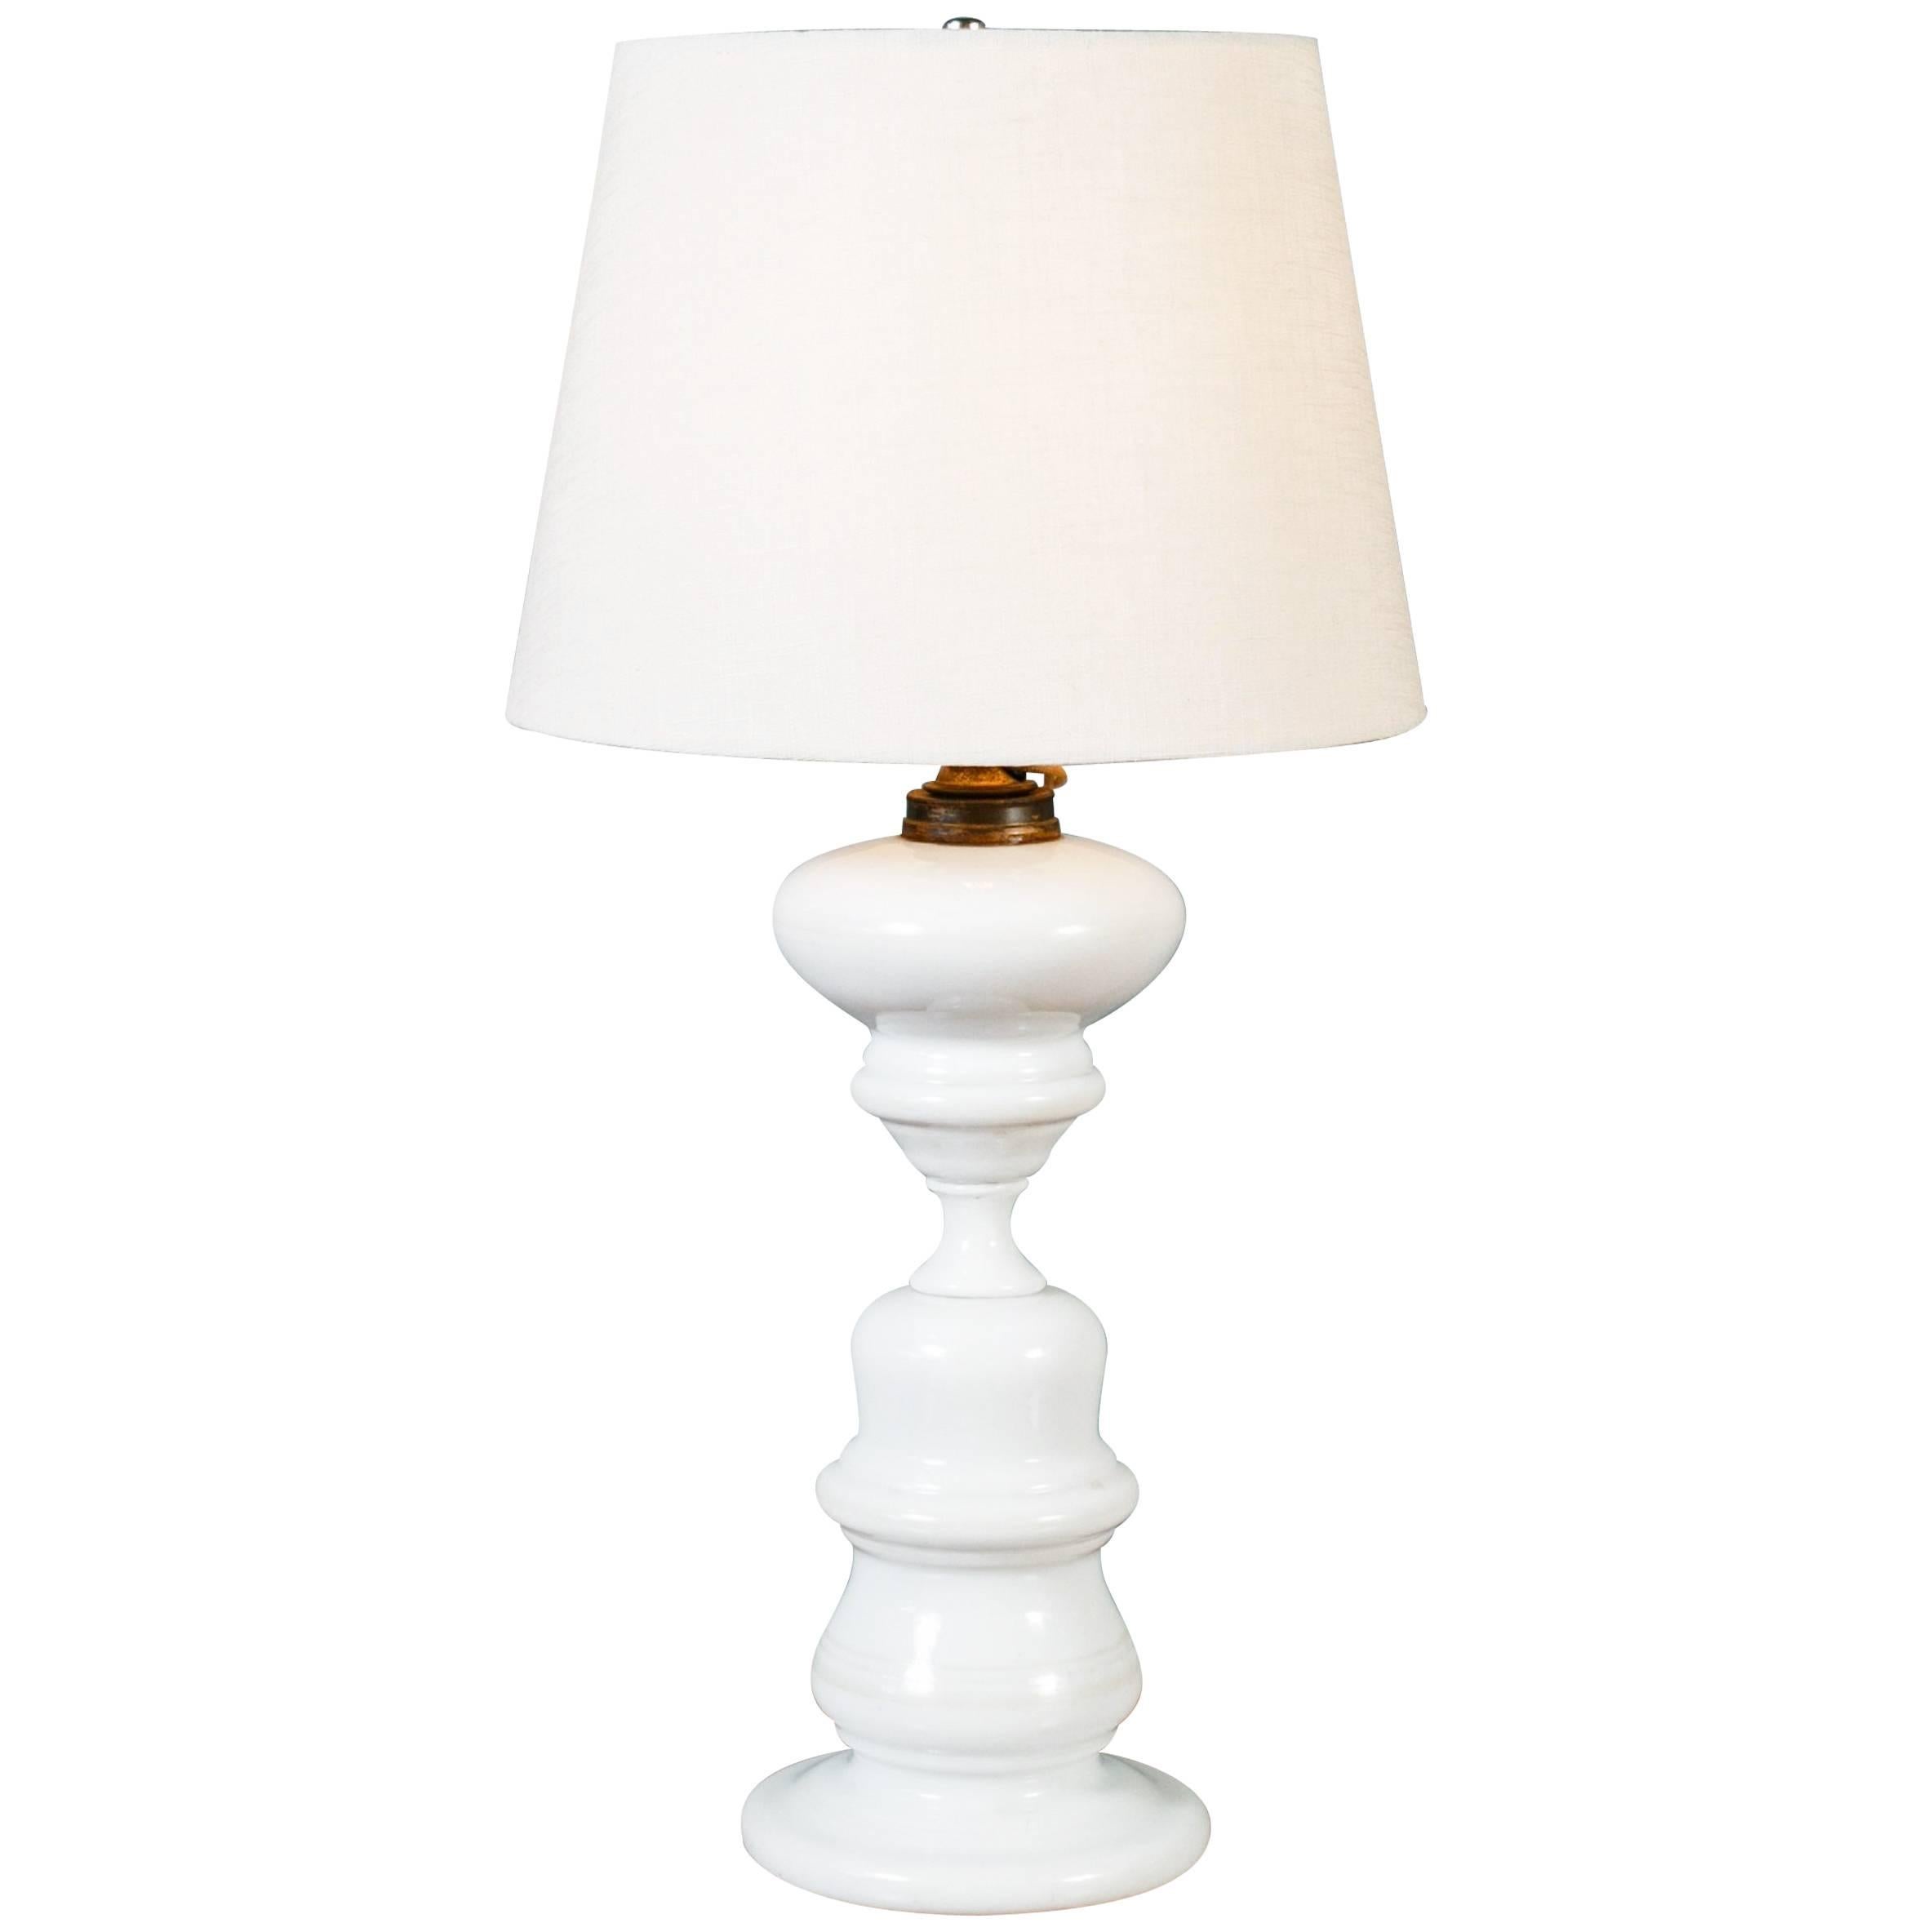 American Milk Glass Table Lamp with Shade, circa 1920